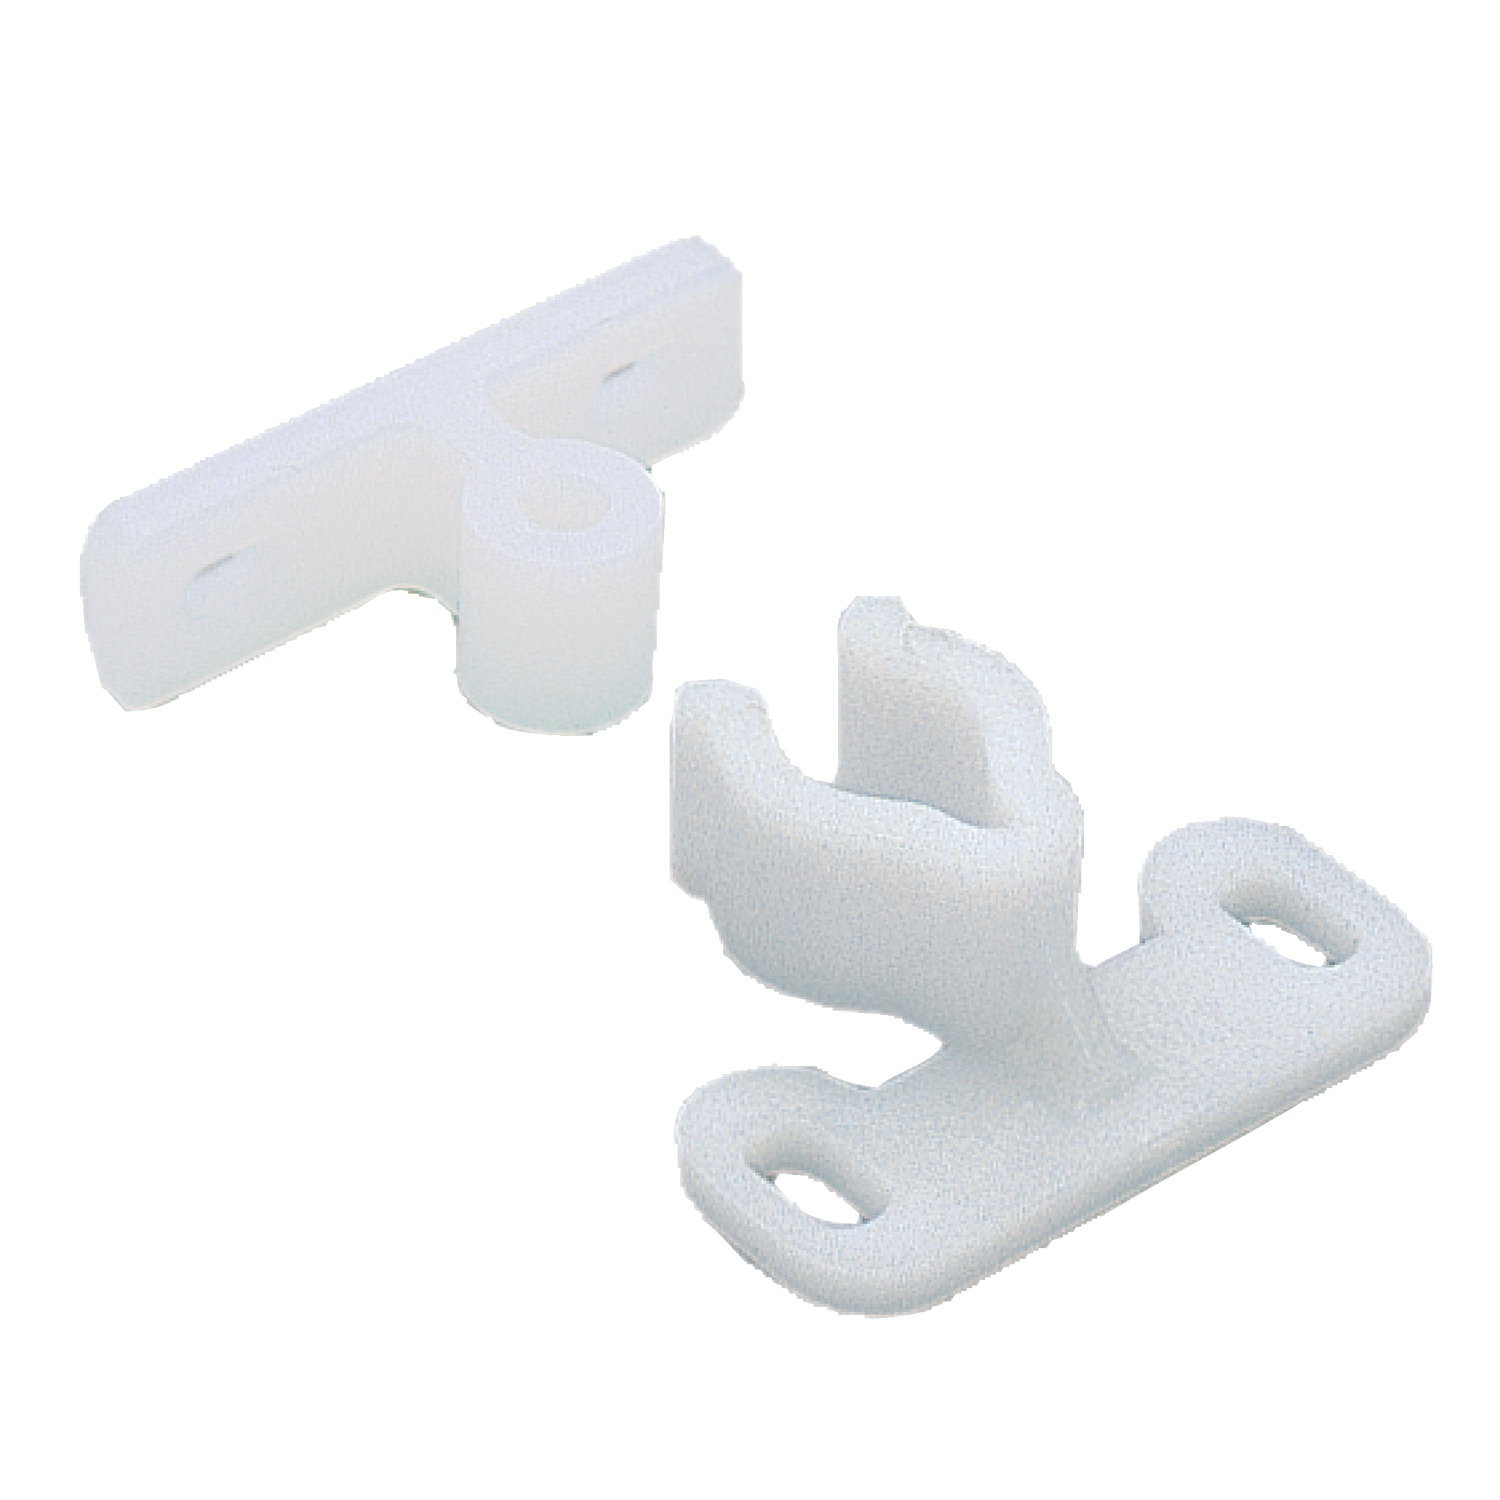 Knuckle Catches Simple knuckle catch of polyacetal, for light weight cupboards and draws. 7.1Kg pull out force.